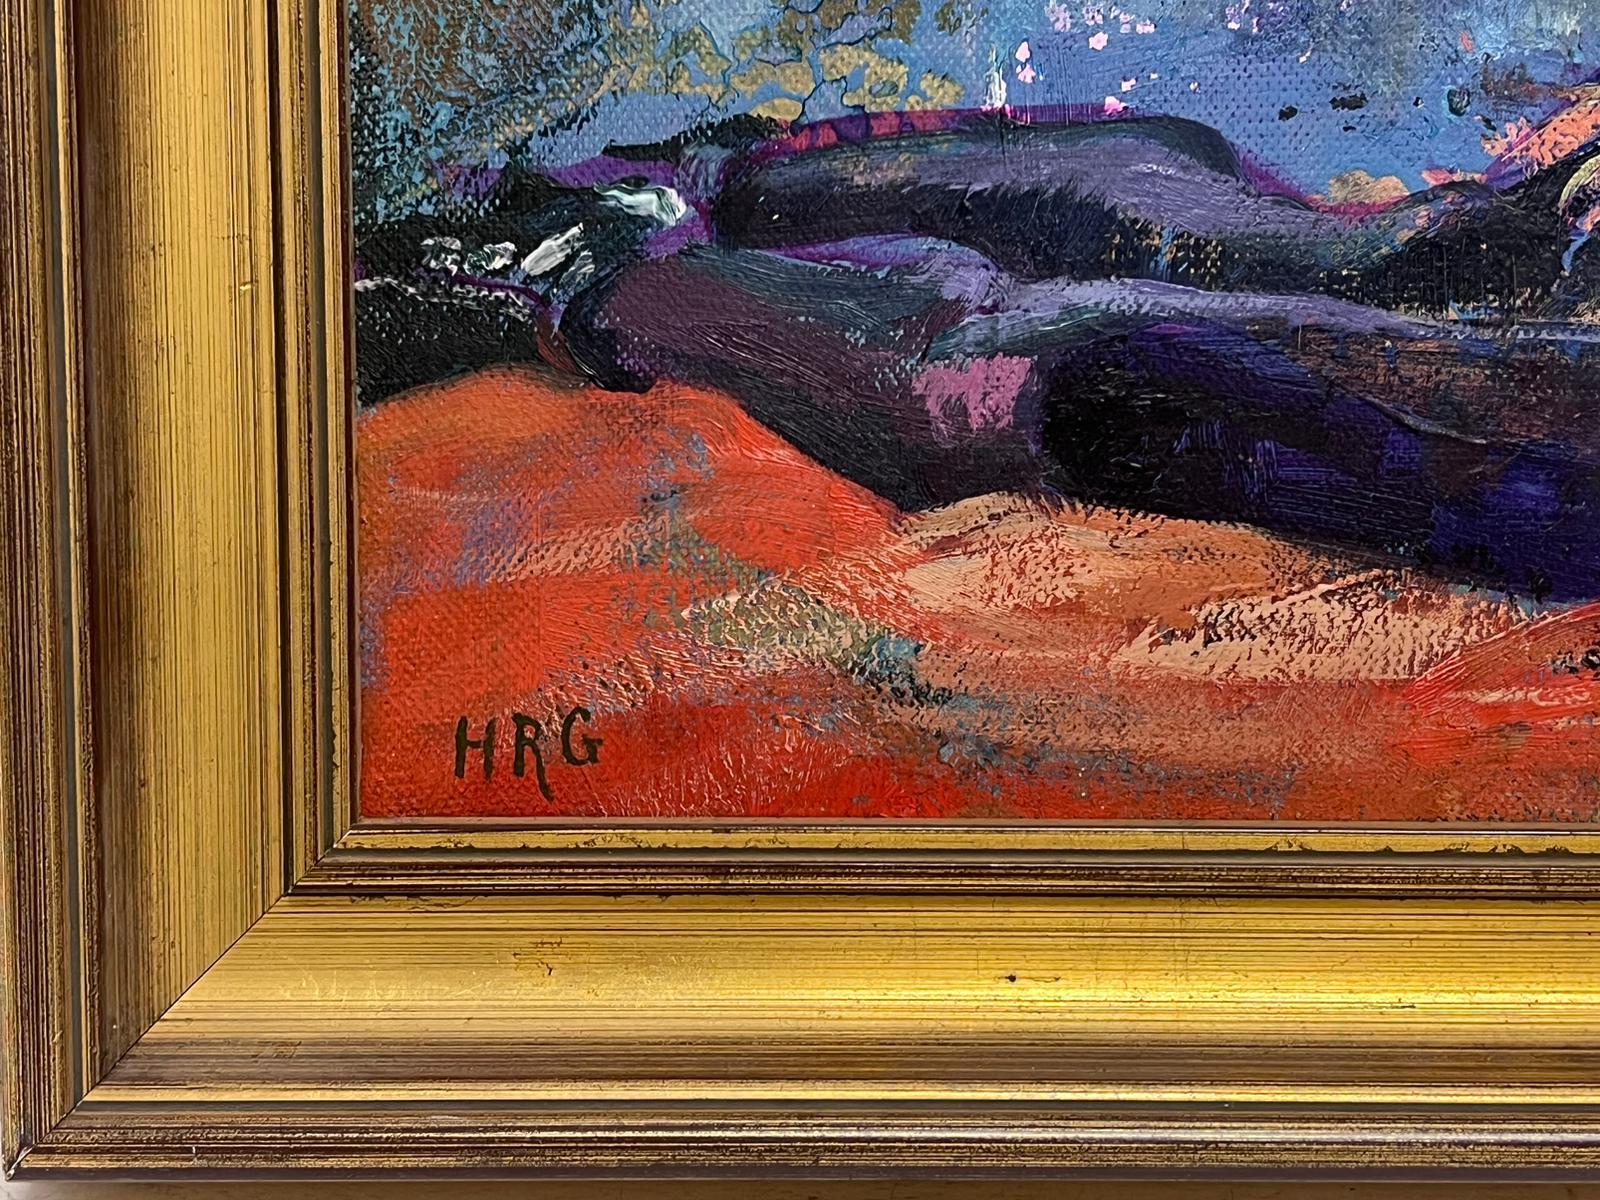 Posed Figure
by Helen Greenfield (British 20th century)
signed initials oil painting on board, framed
framed: 19.5 x 28.5 inches
board: 15 x 24 inches
condition: overall very good
provenance: all the paintings we have by this artist have come from